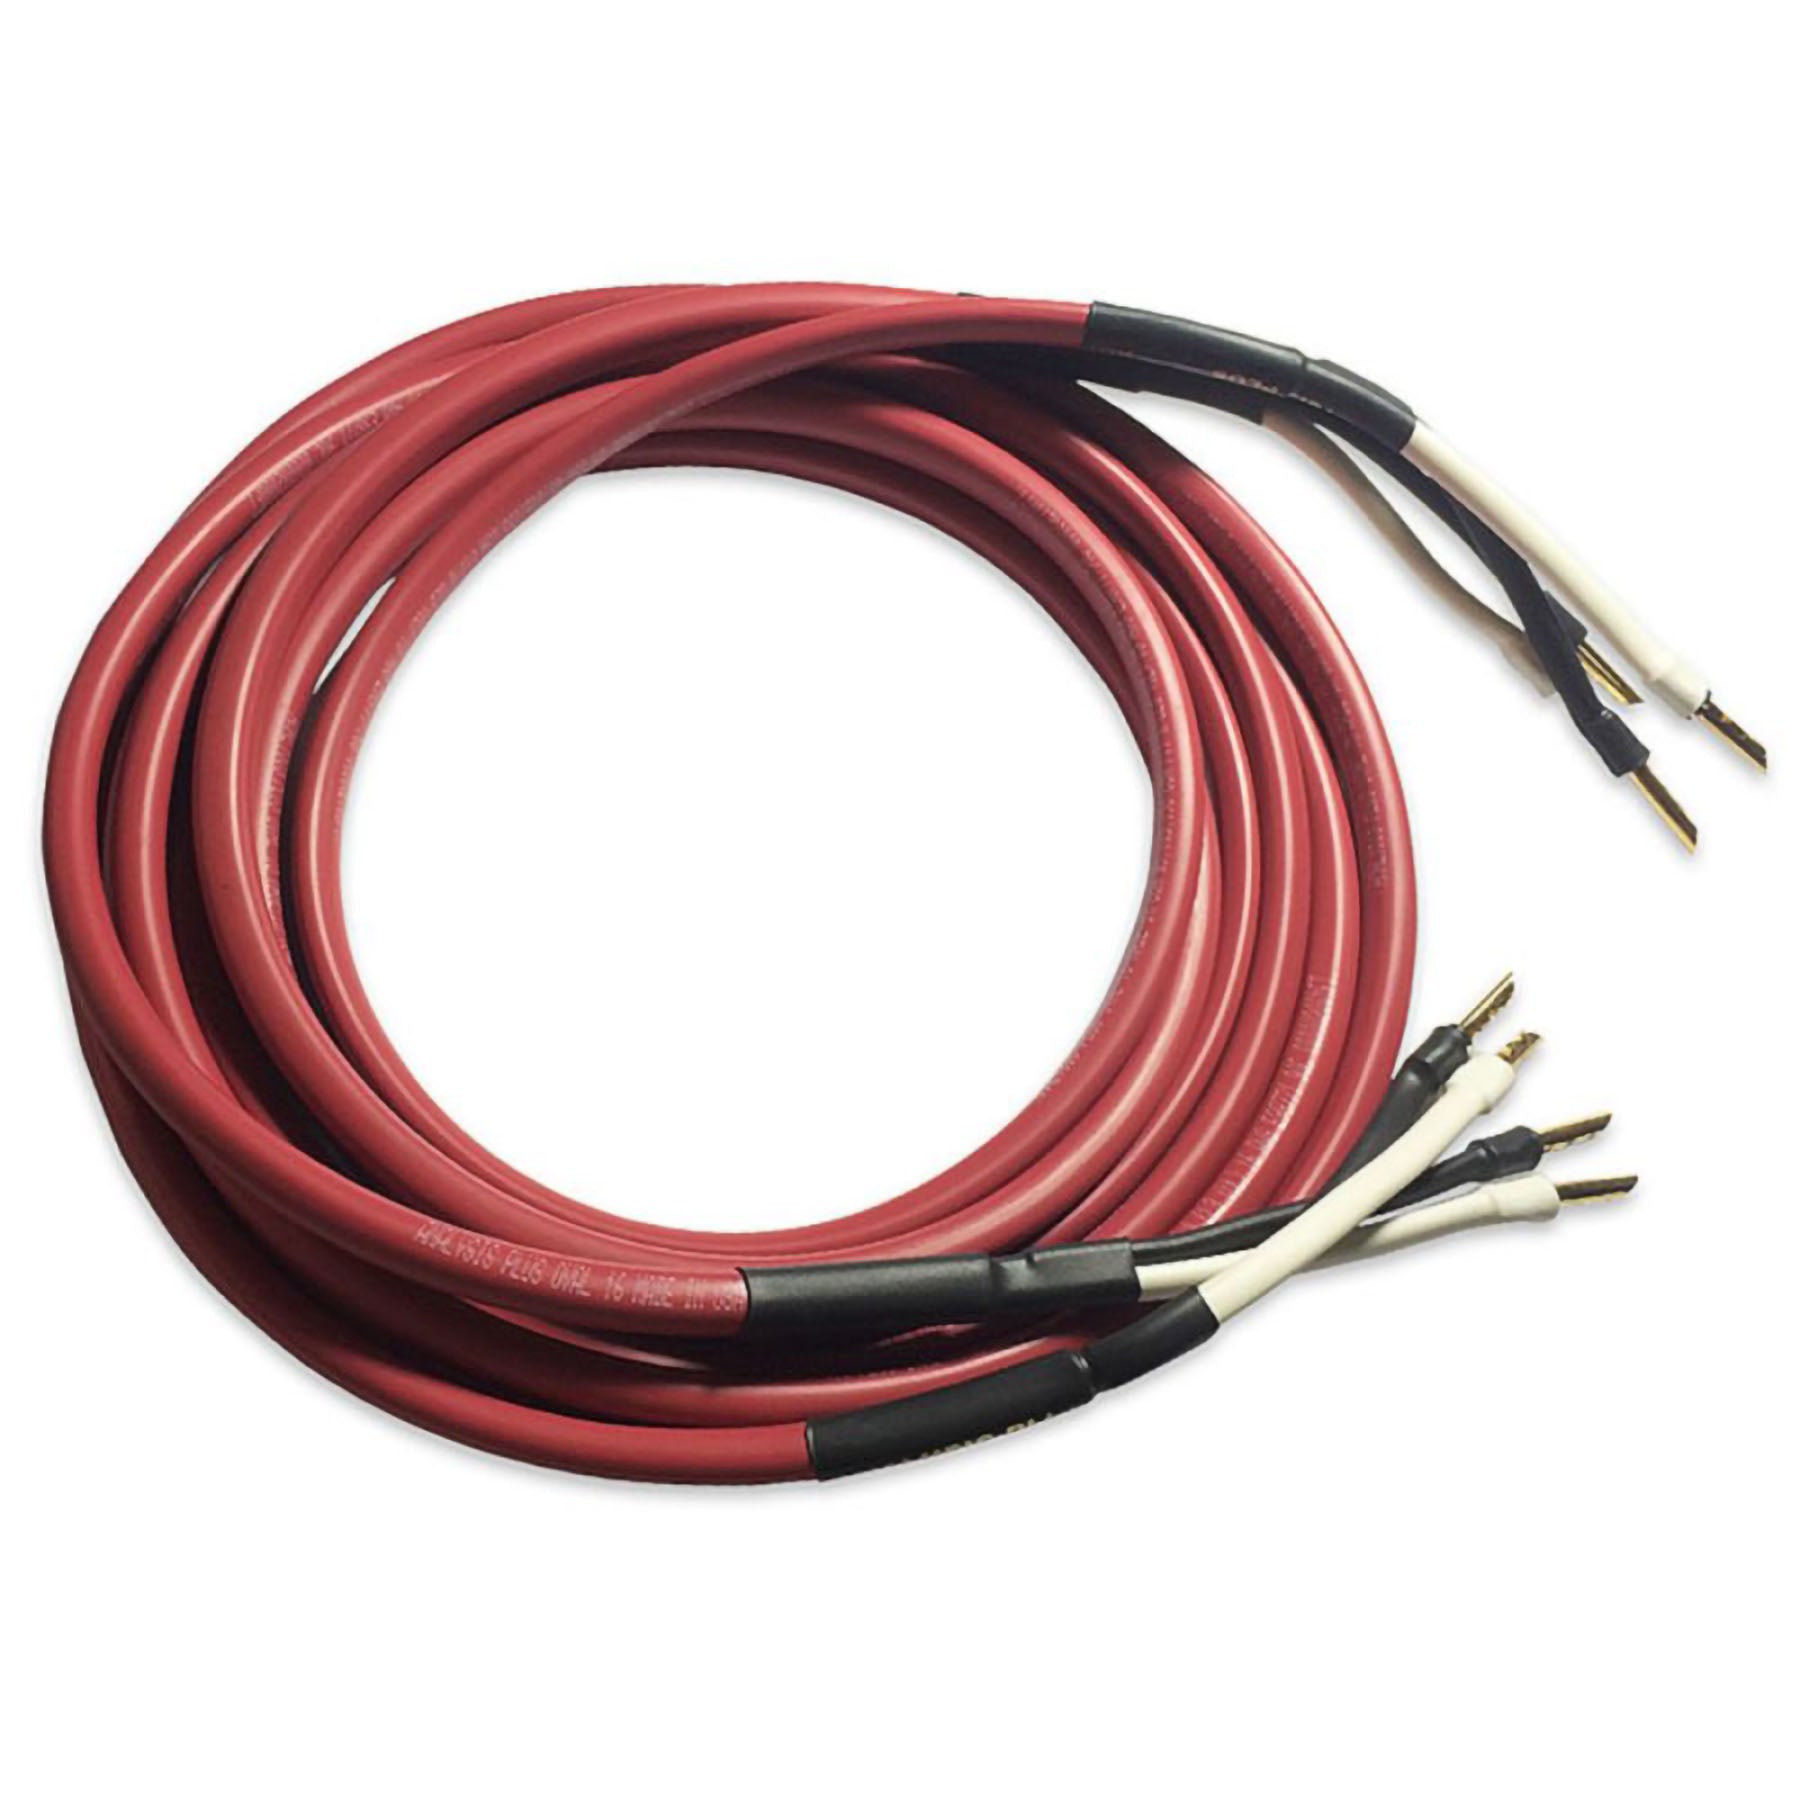 Analysis Plus Oval 16 UL CL3 Speaker Cable